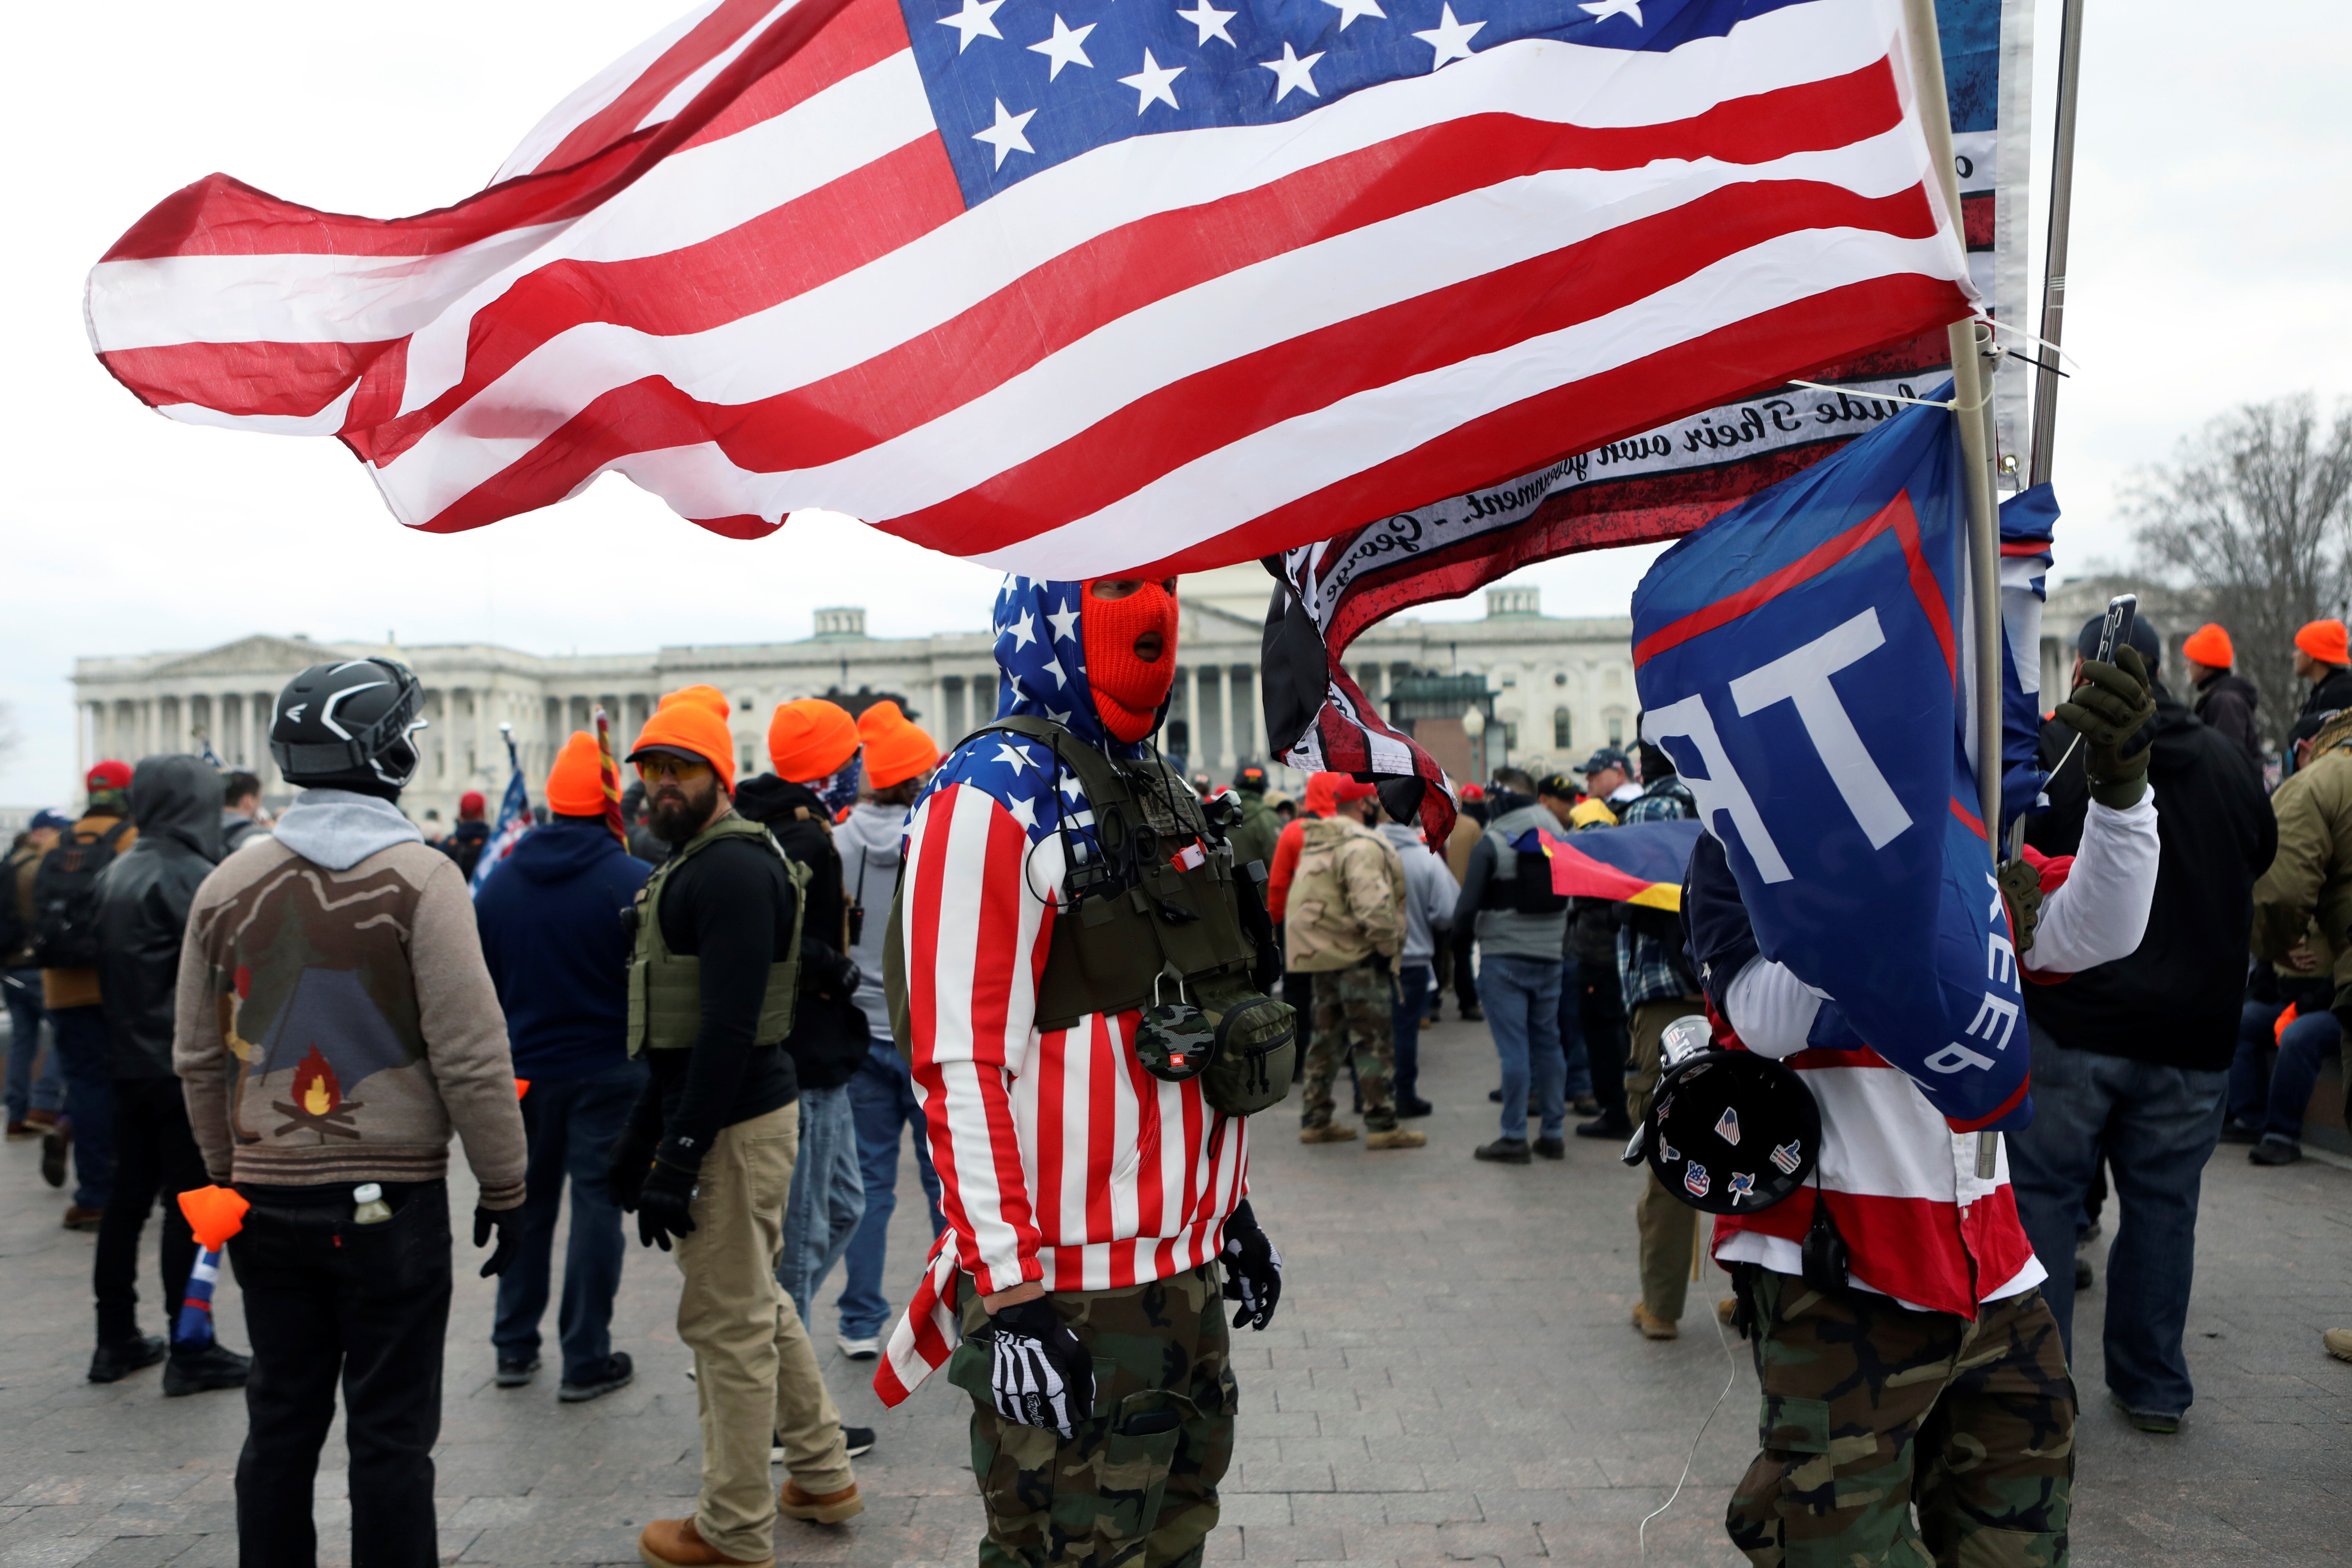 Members of the far-right group Proud Boys and other supporters of Donald Trump gather in front of the US Capitol Building to protest against the certification of the 2020 US presidential election results by Congress on January 6. Photo: Reuters